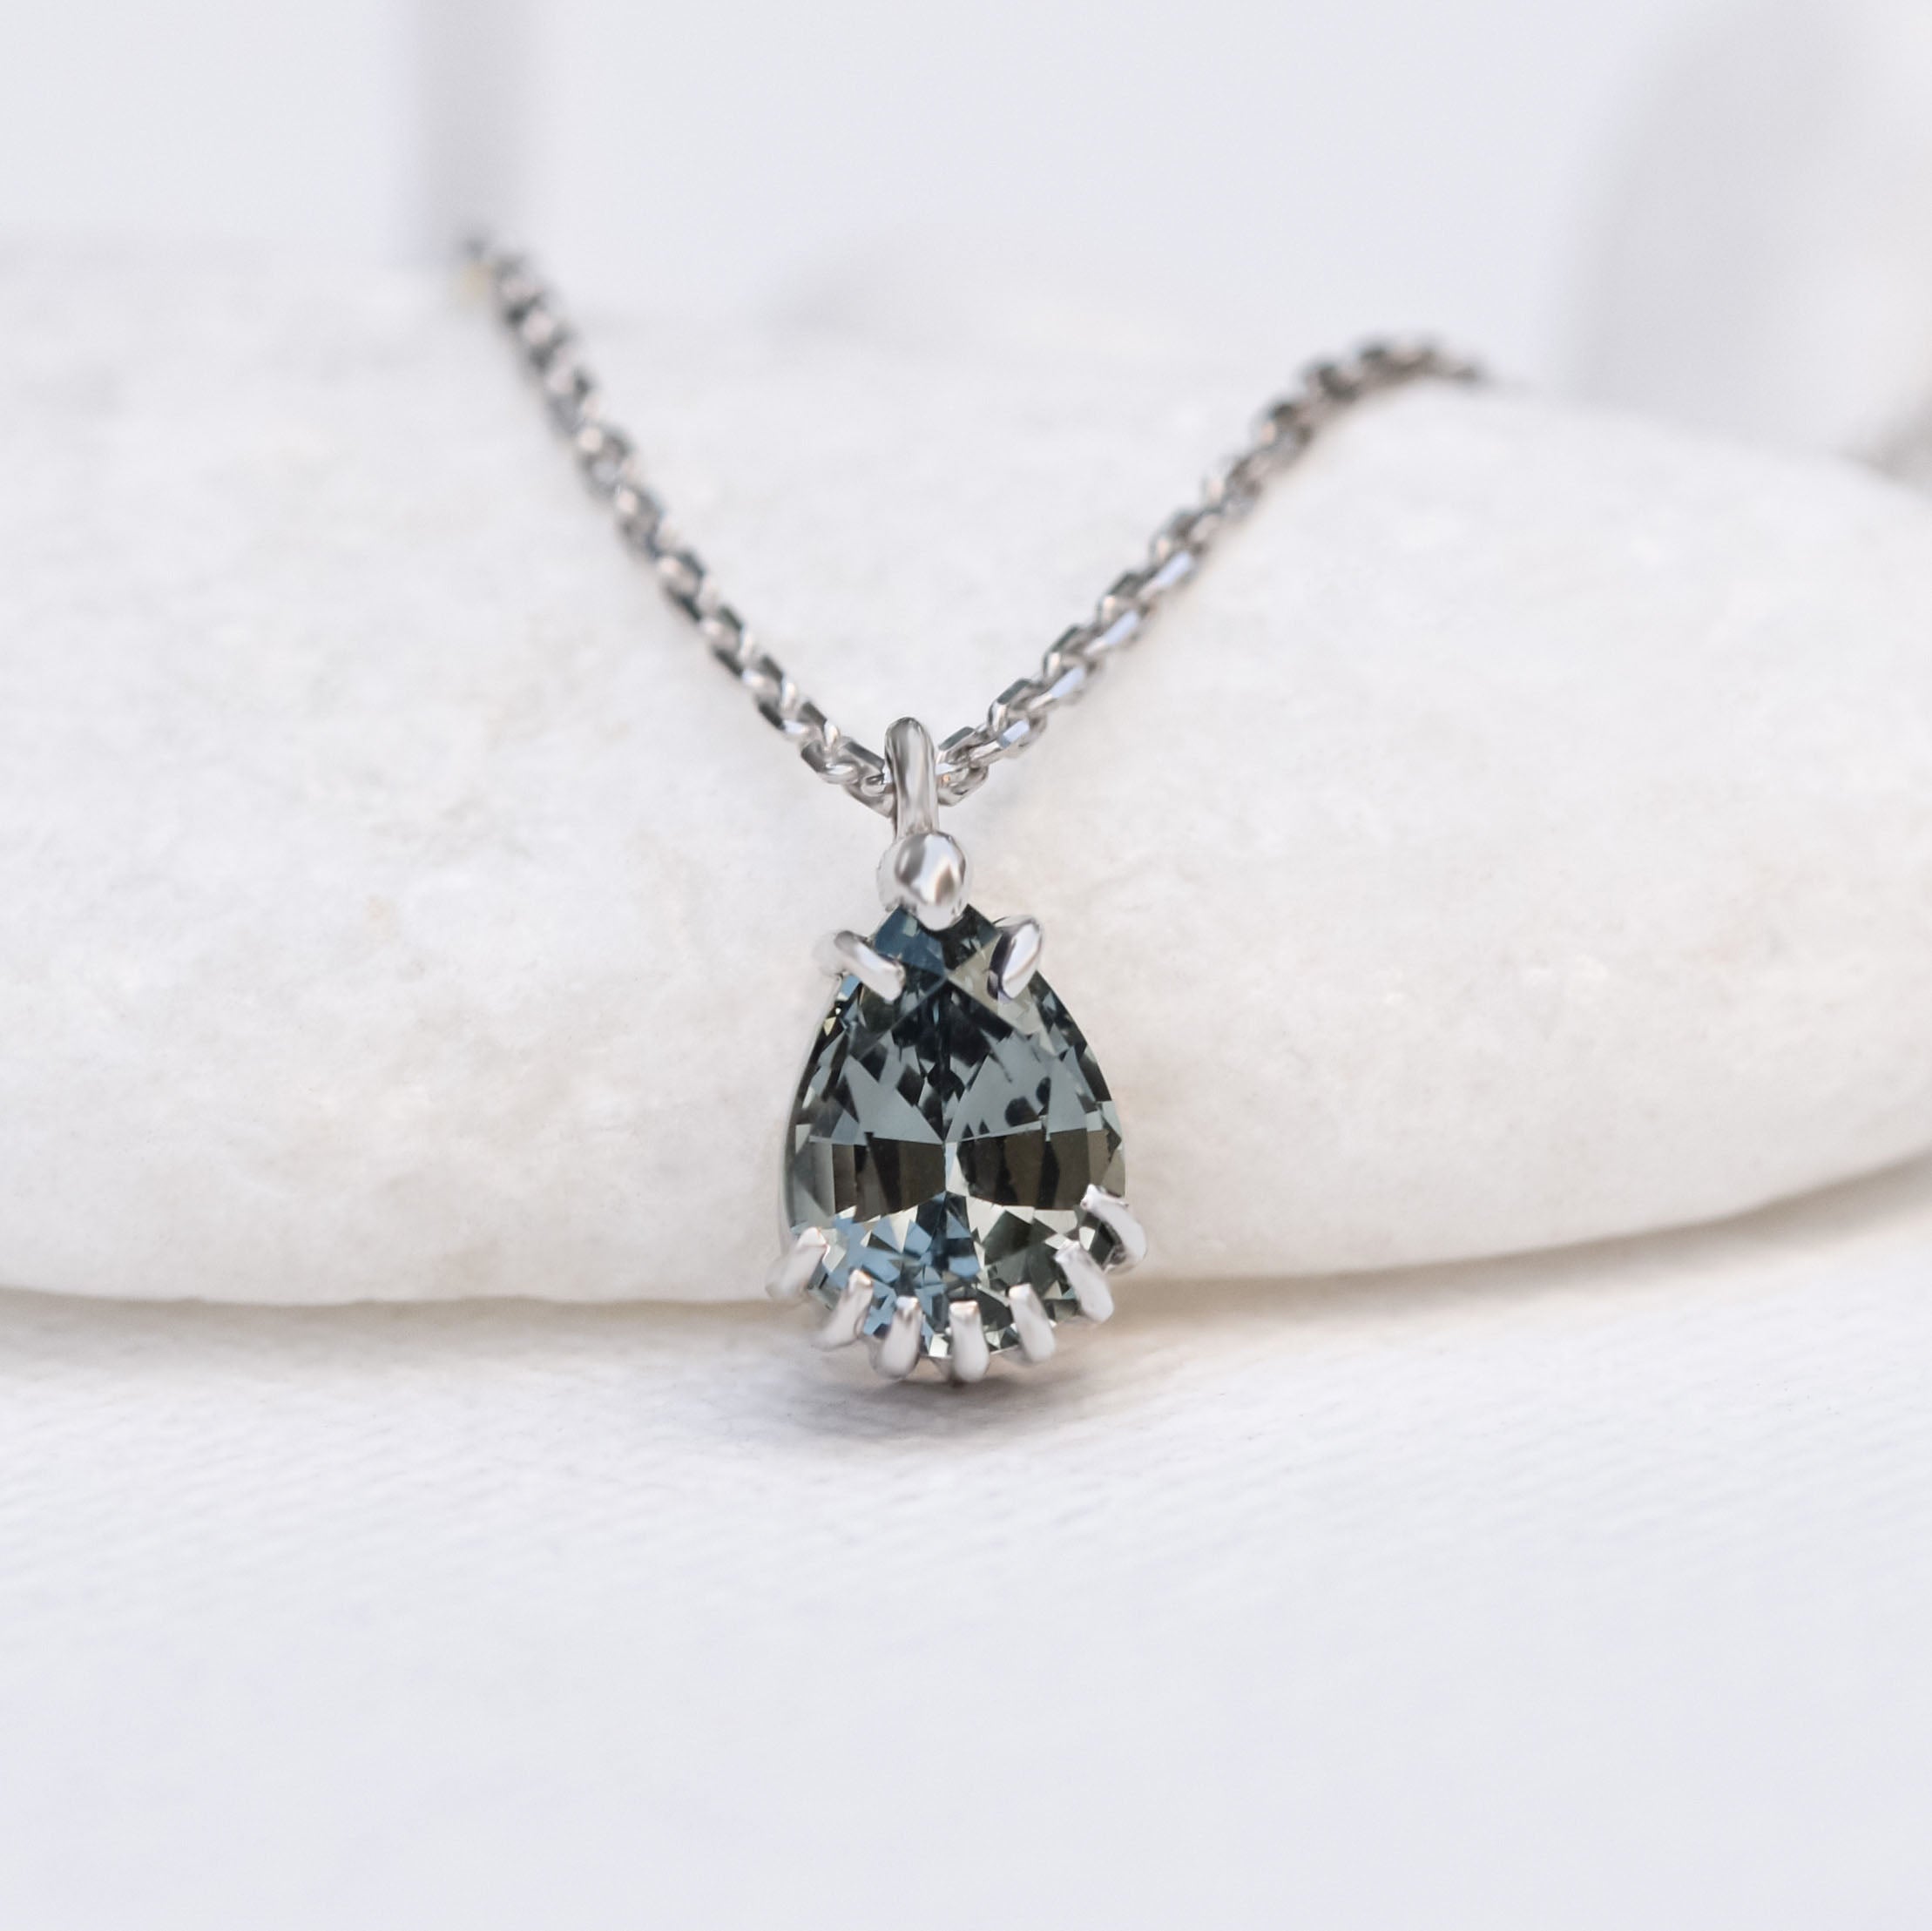 14k white gold gemstone necklace featuring a pear cut greenish grey spinal stone pendant